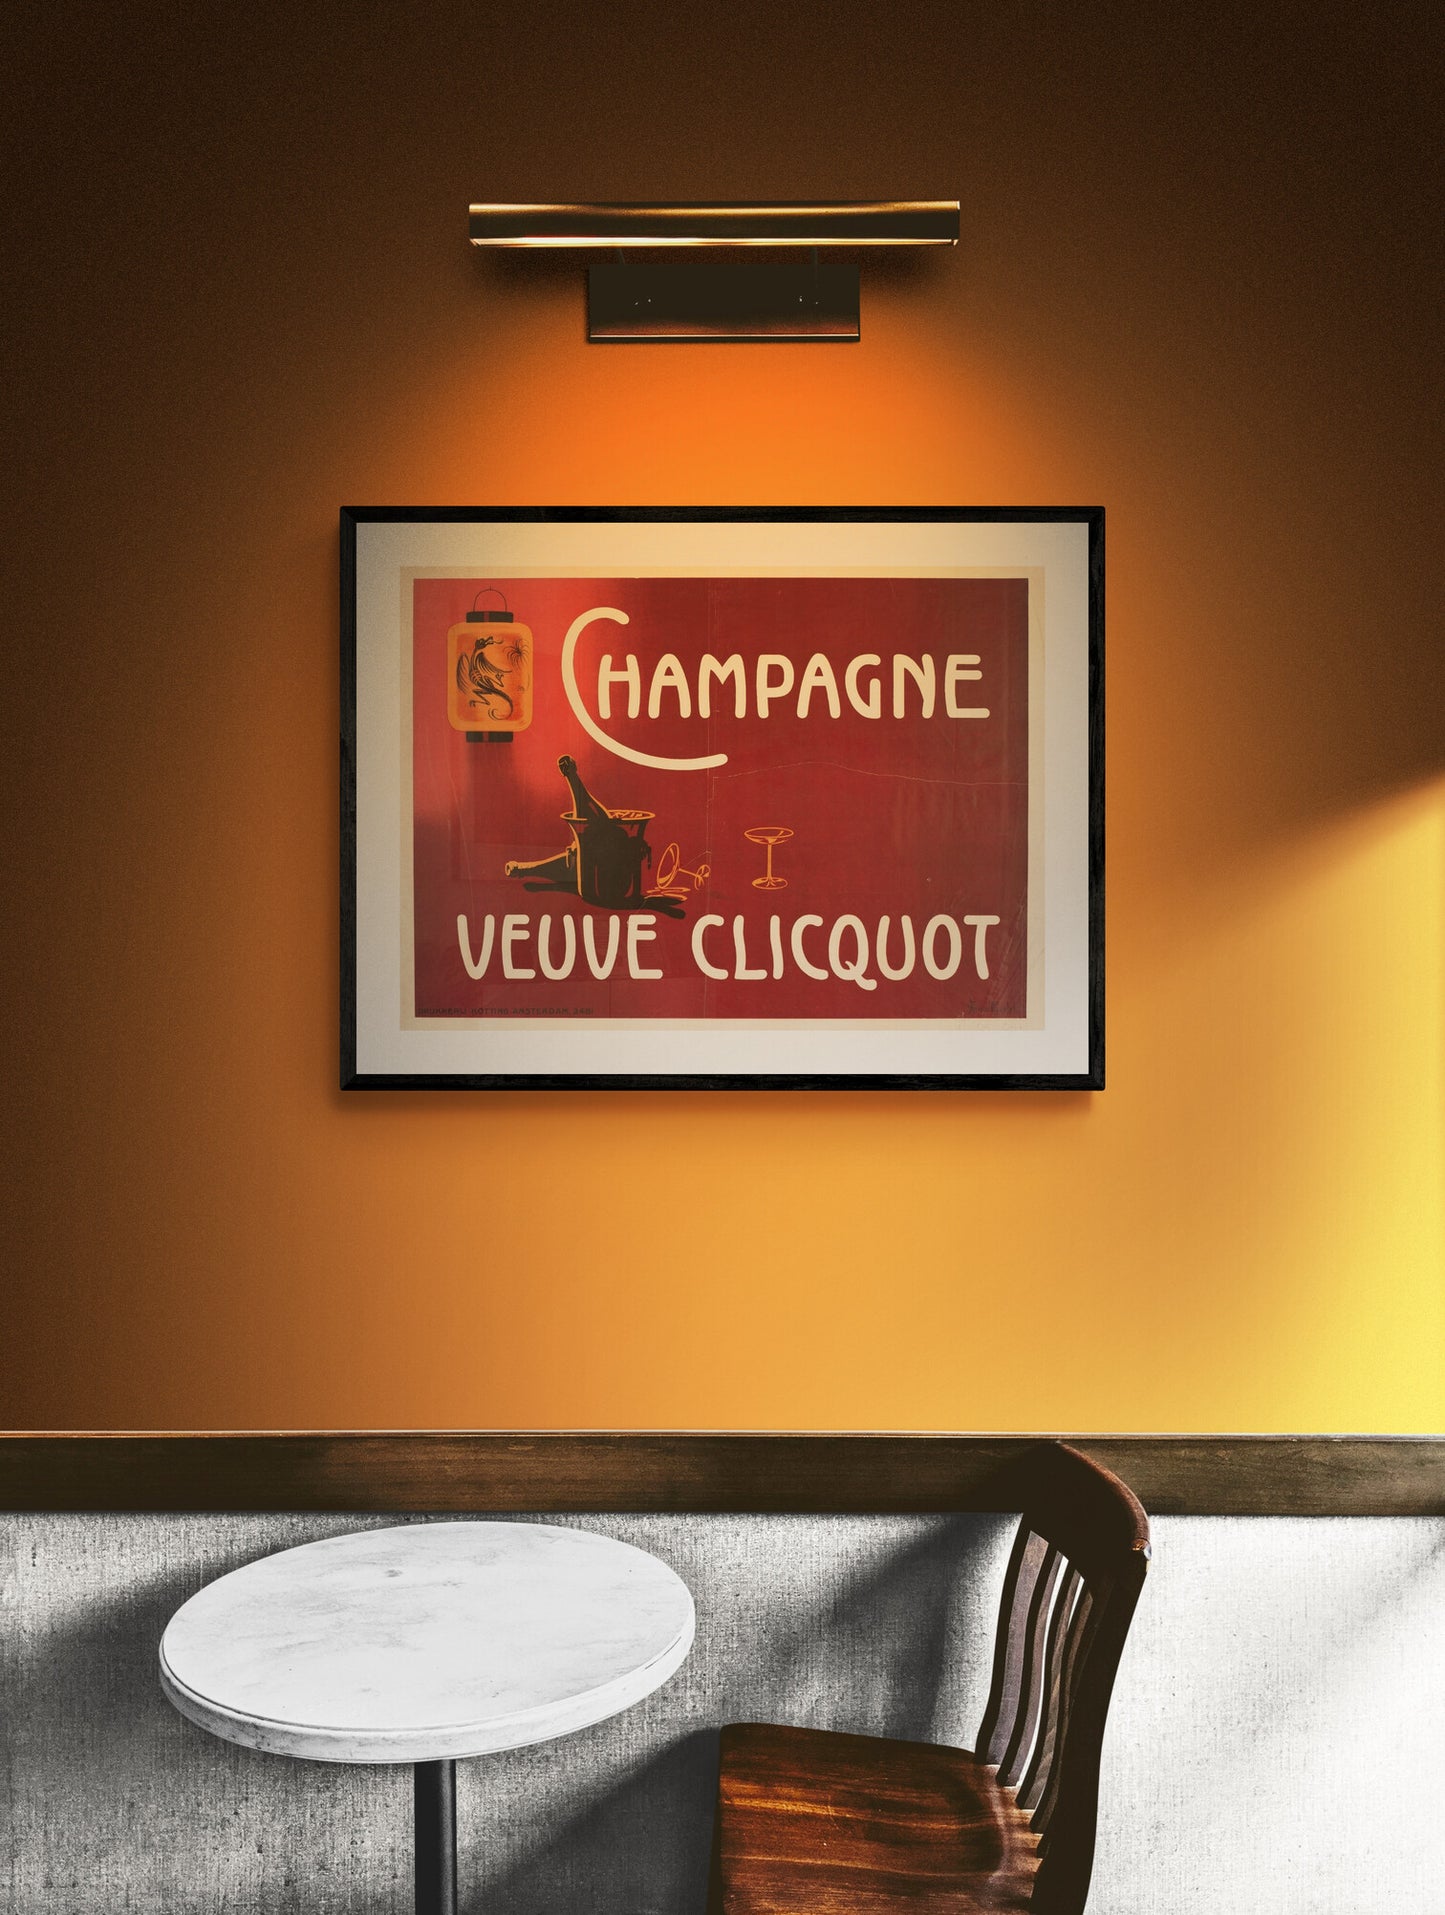 Veuve Clicquot poster (1900s) | Champagne | Arnold van Roessel Posters, Prints, & Visual Artwork The Trumpet Shop   